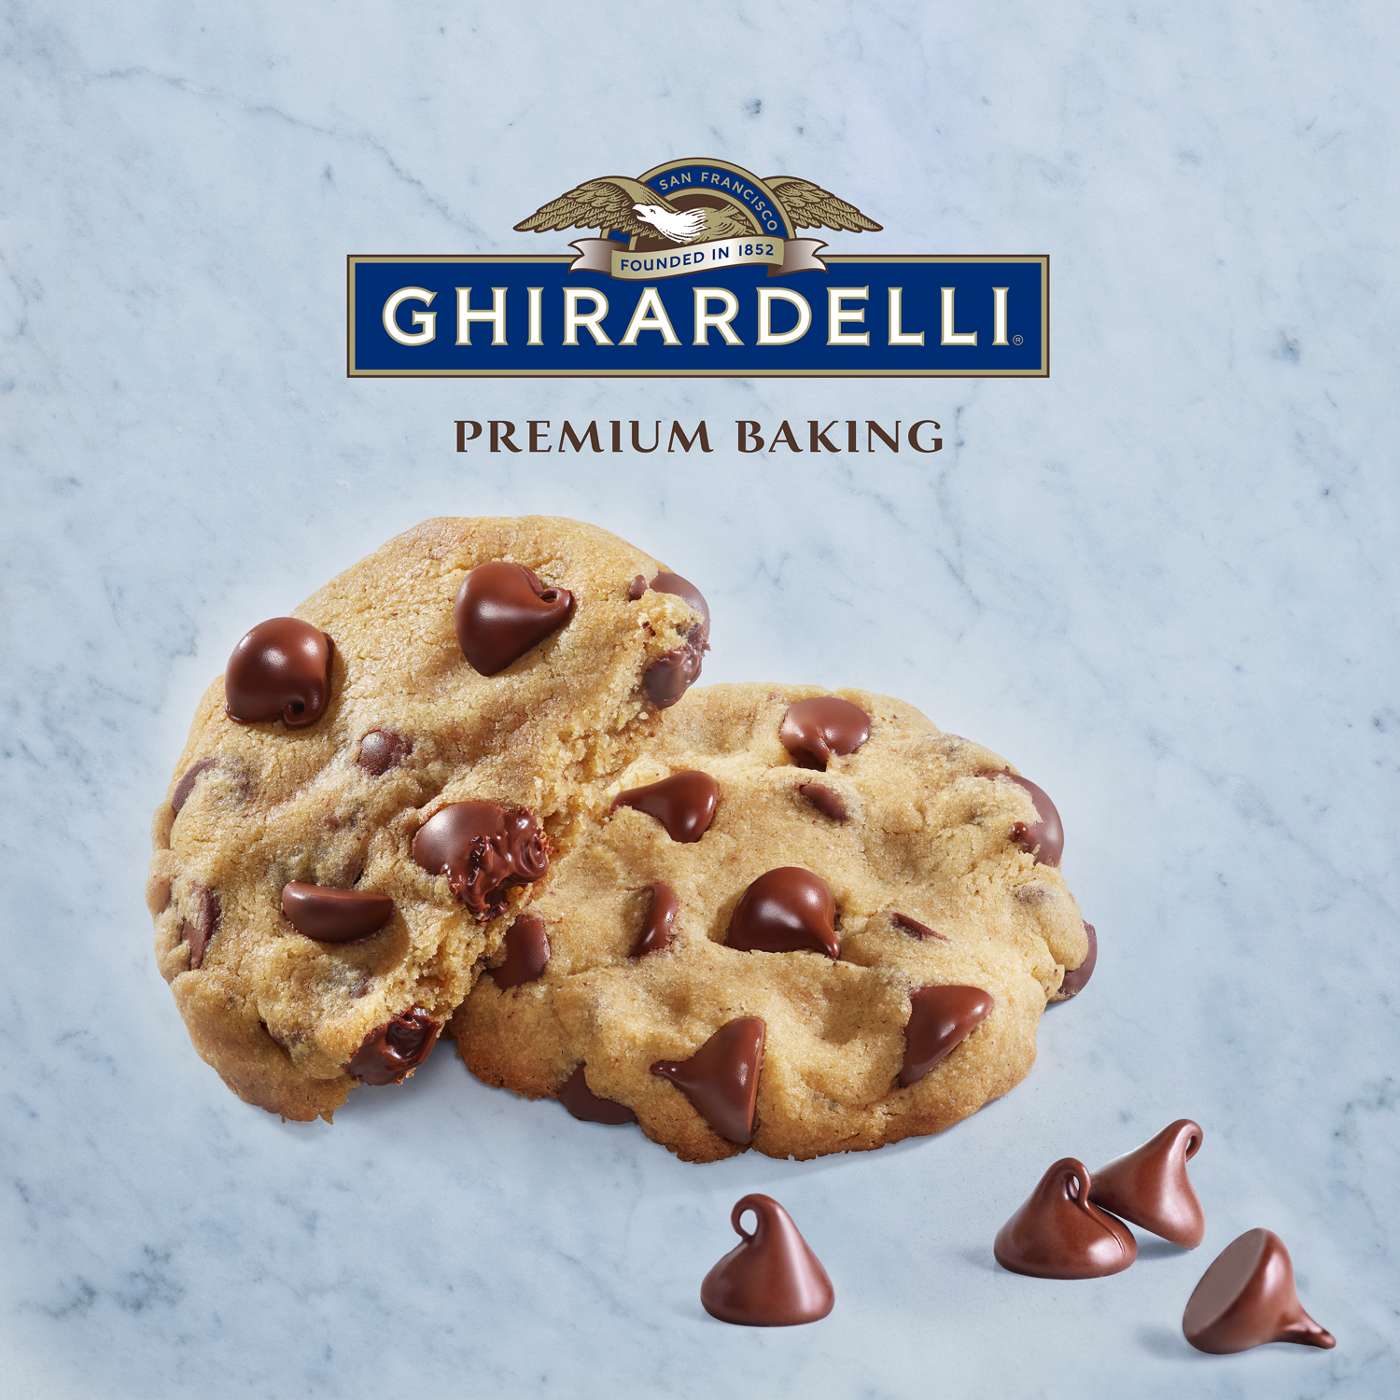 Ghirardelli 72% Cacao Dark Chocolate Premium Baking Chips, Chocolate Chips for Baking; image 5 of 7